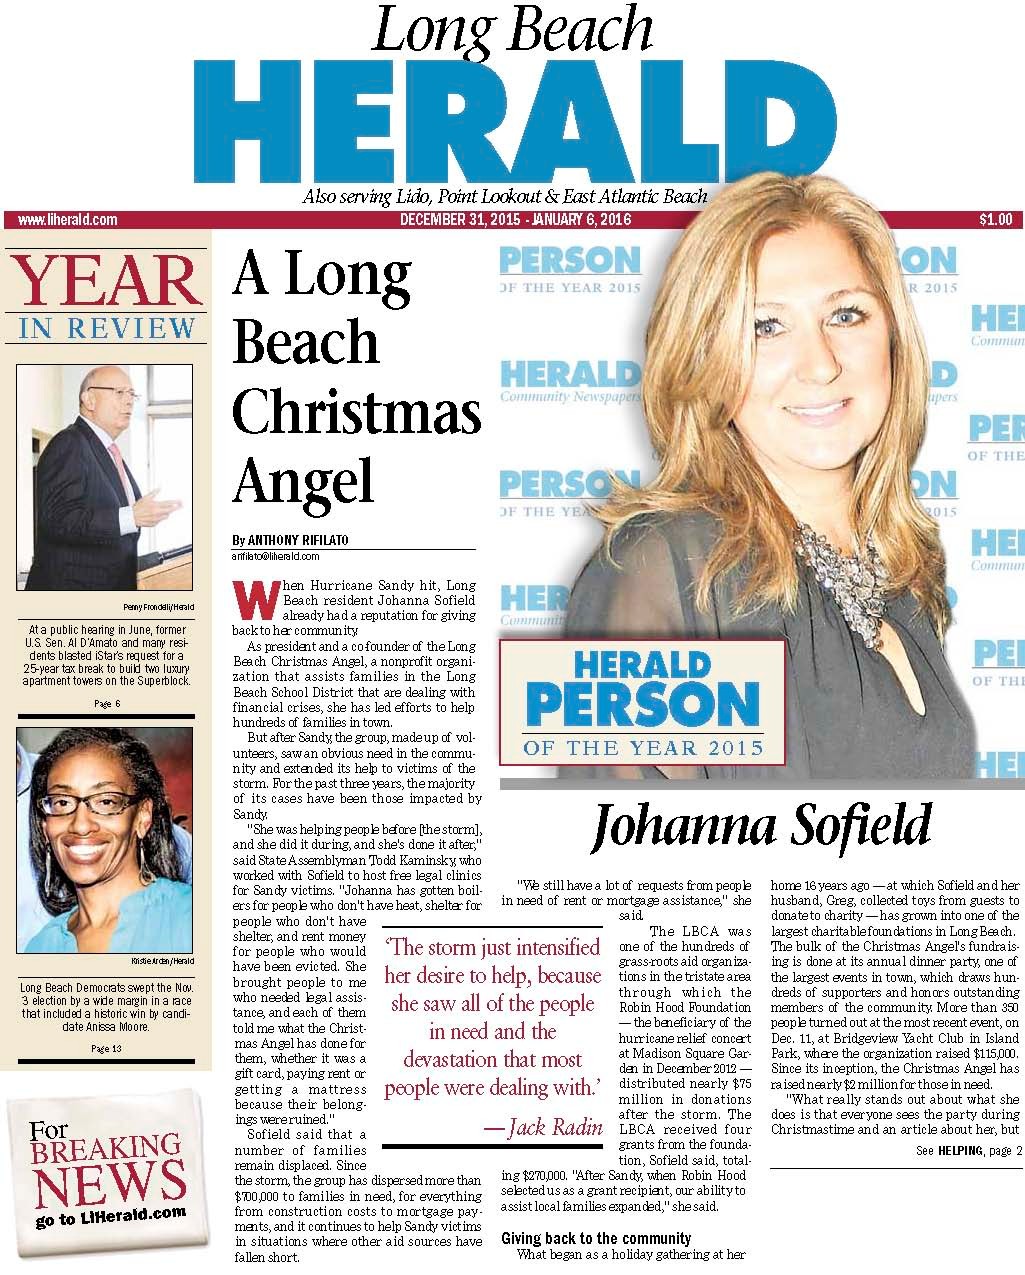 Johanna Sofield, president and co-founder of the nonprofit organization the Long Beach Christmas Angel, is the Herald's 2015 Person of the Year.